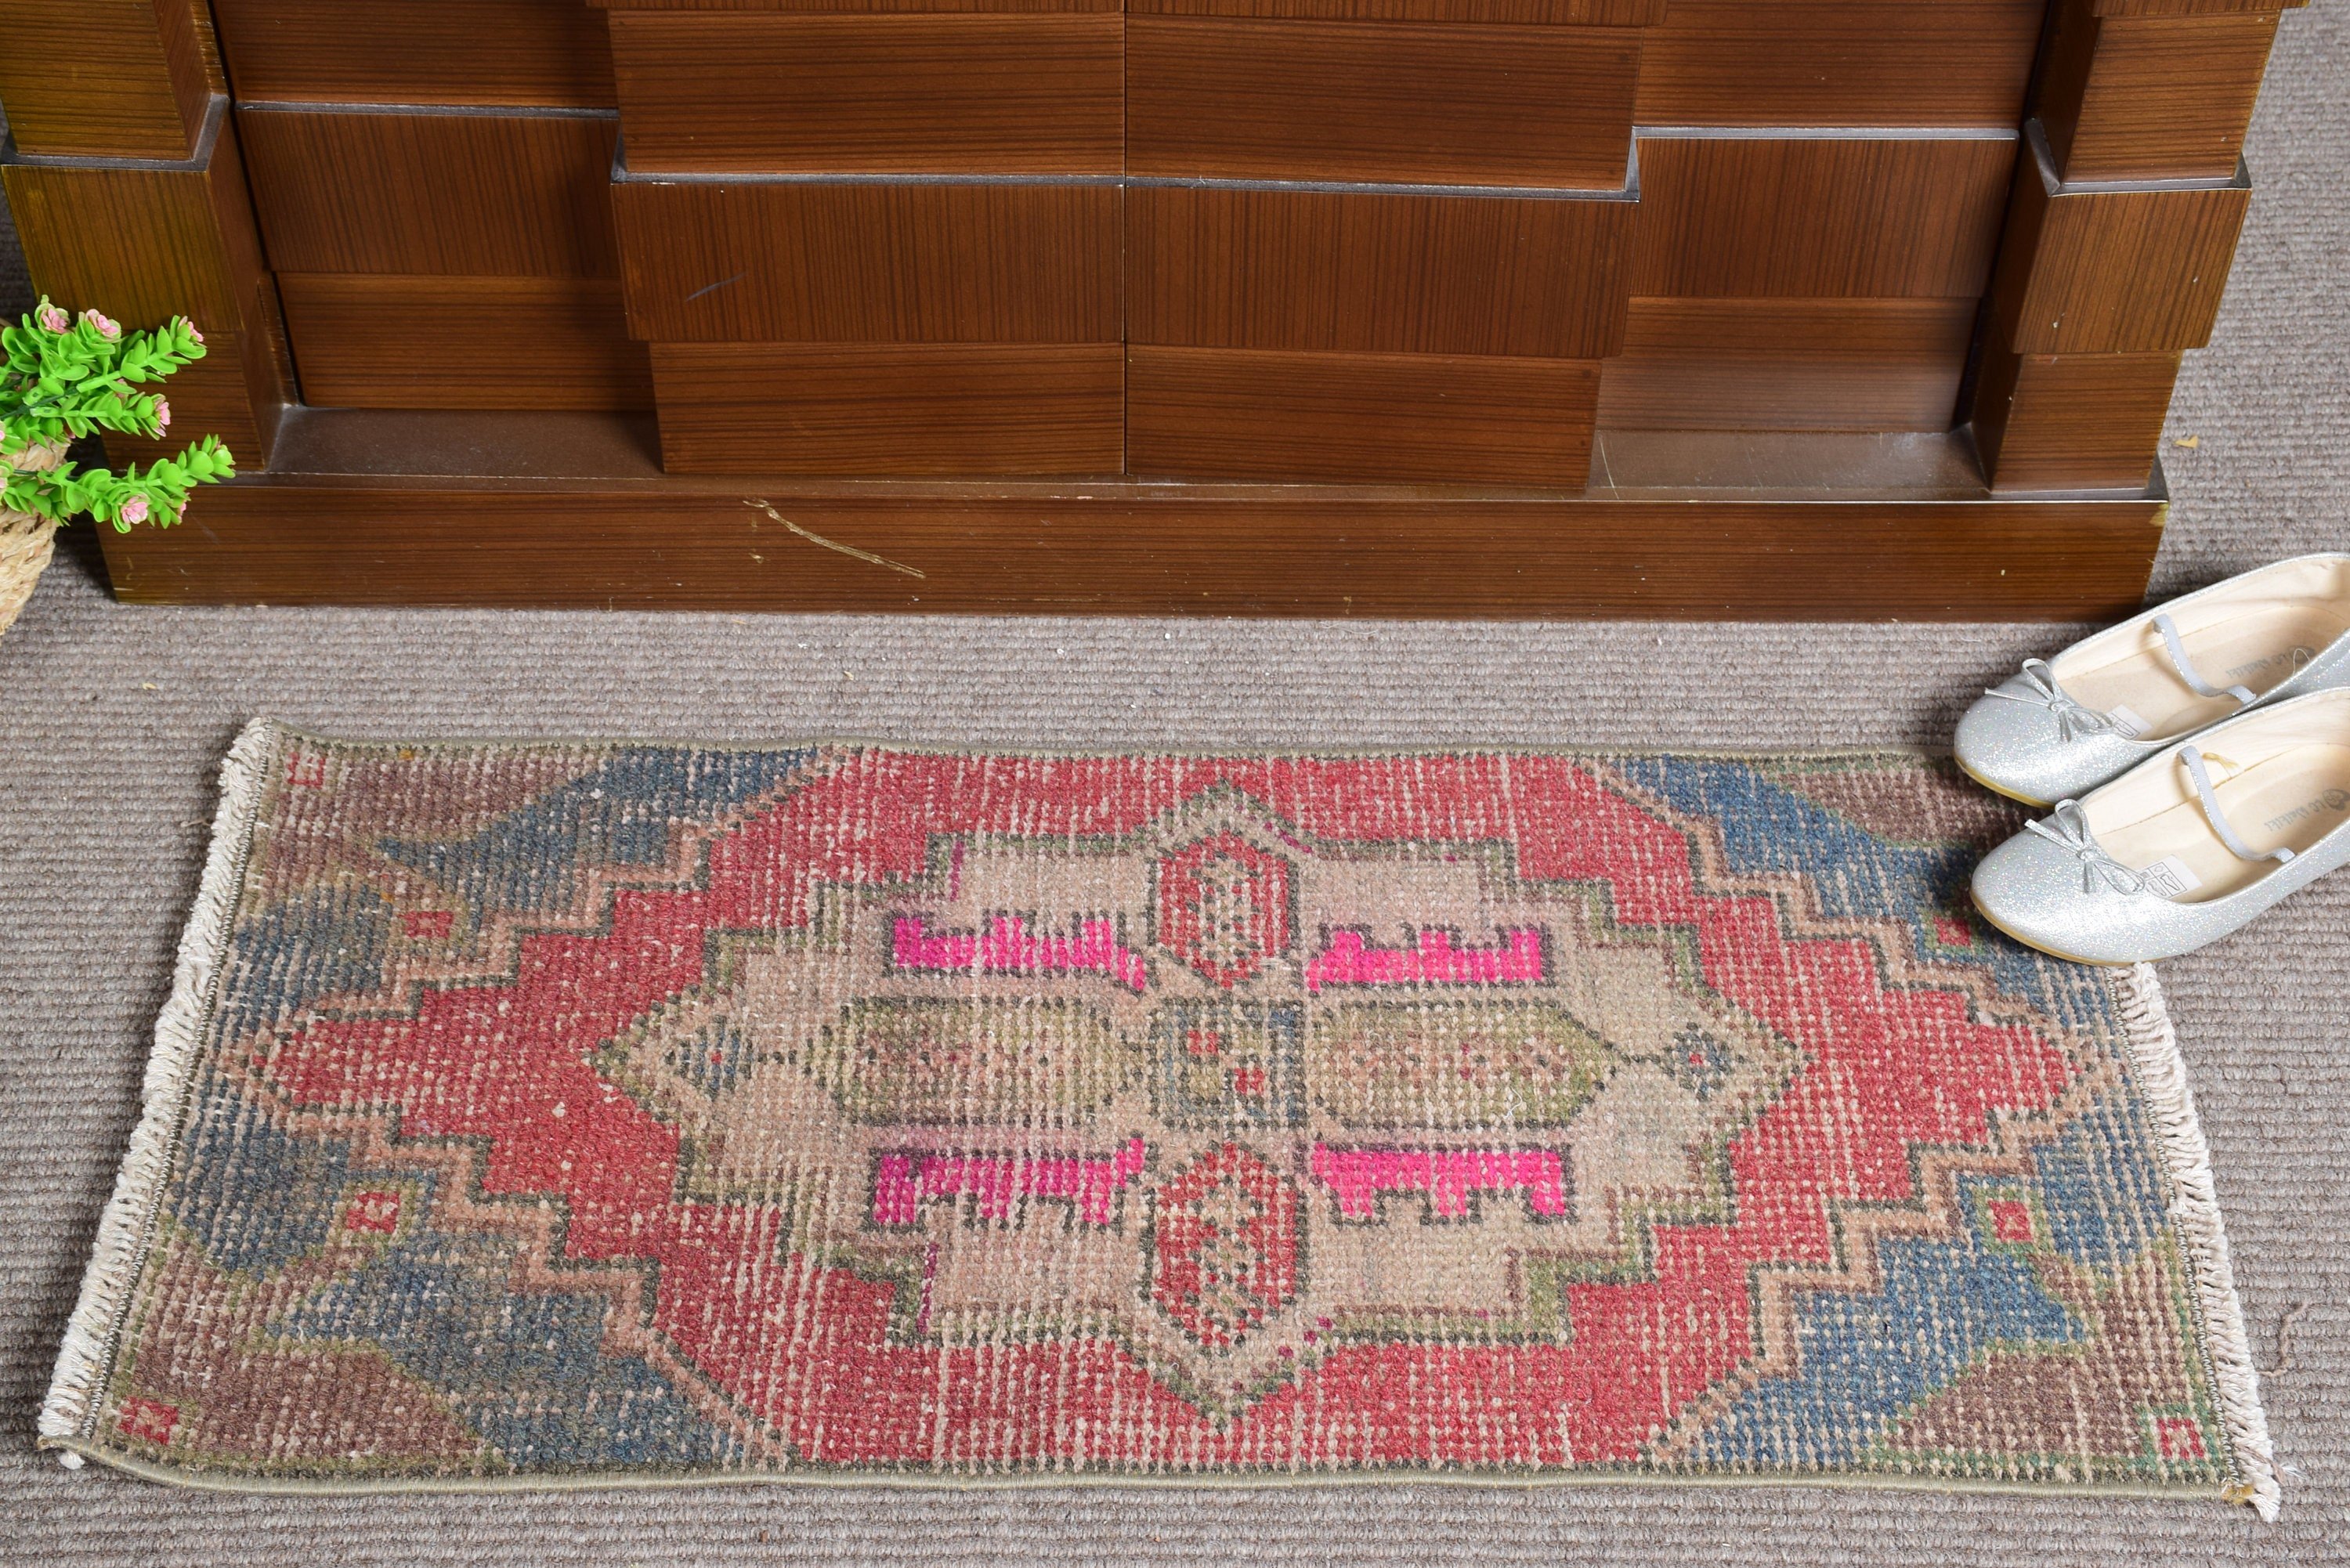 Antique Rug, Kitchen Rugs, Entry Rugs, 1.4x2.8 ft Small Rugs, Oushak Rug, Vintage Rug, Office Rug, Red Cool Rug, Turkish Rug, Rugs for Bath